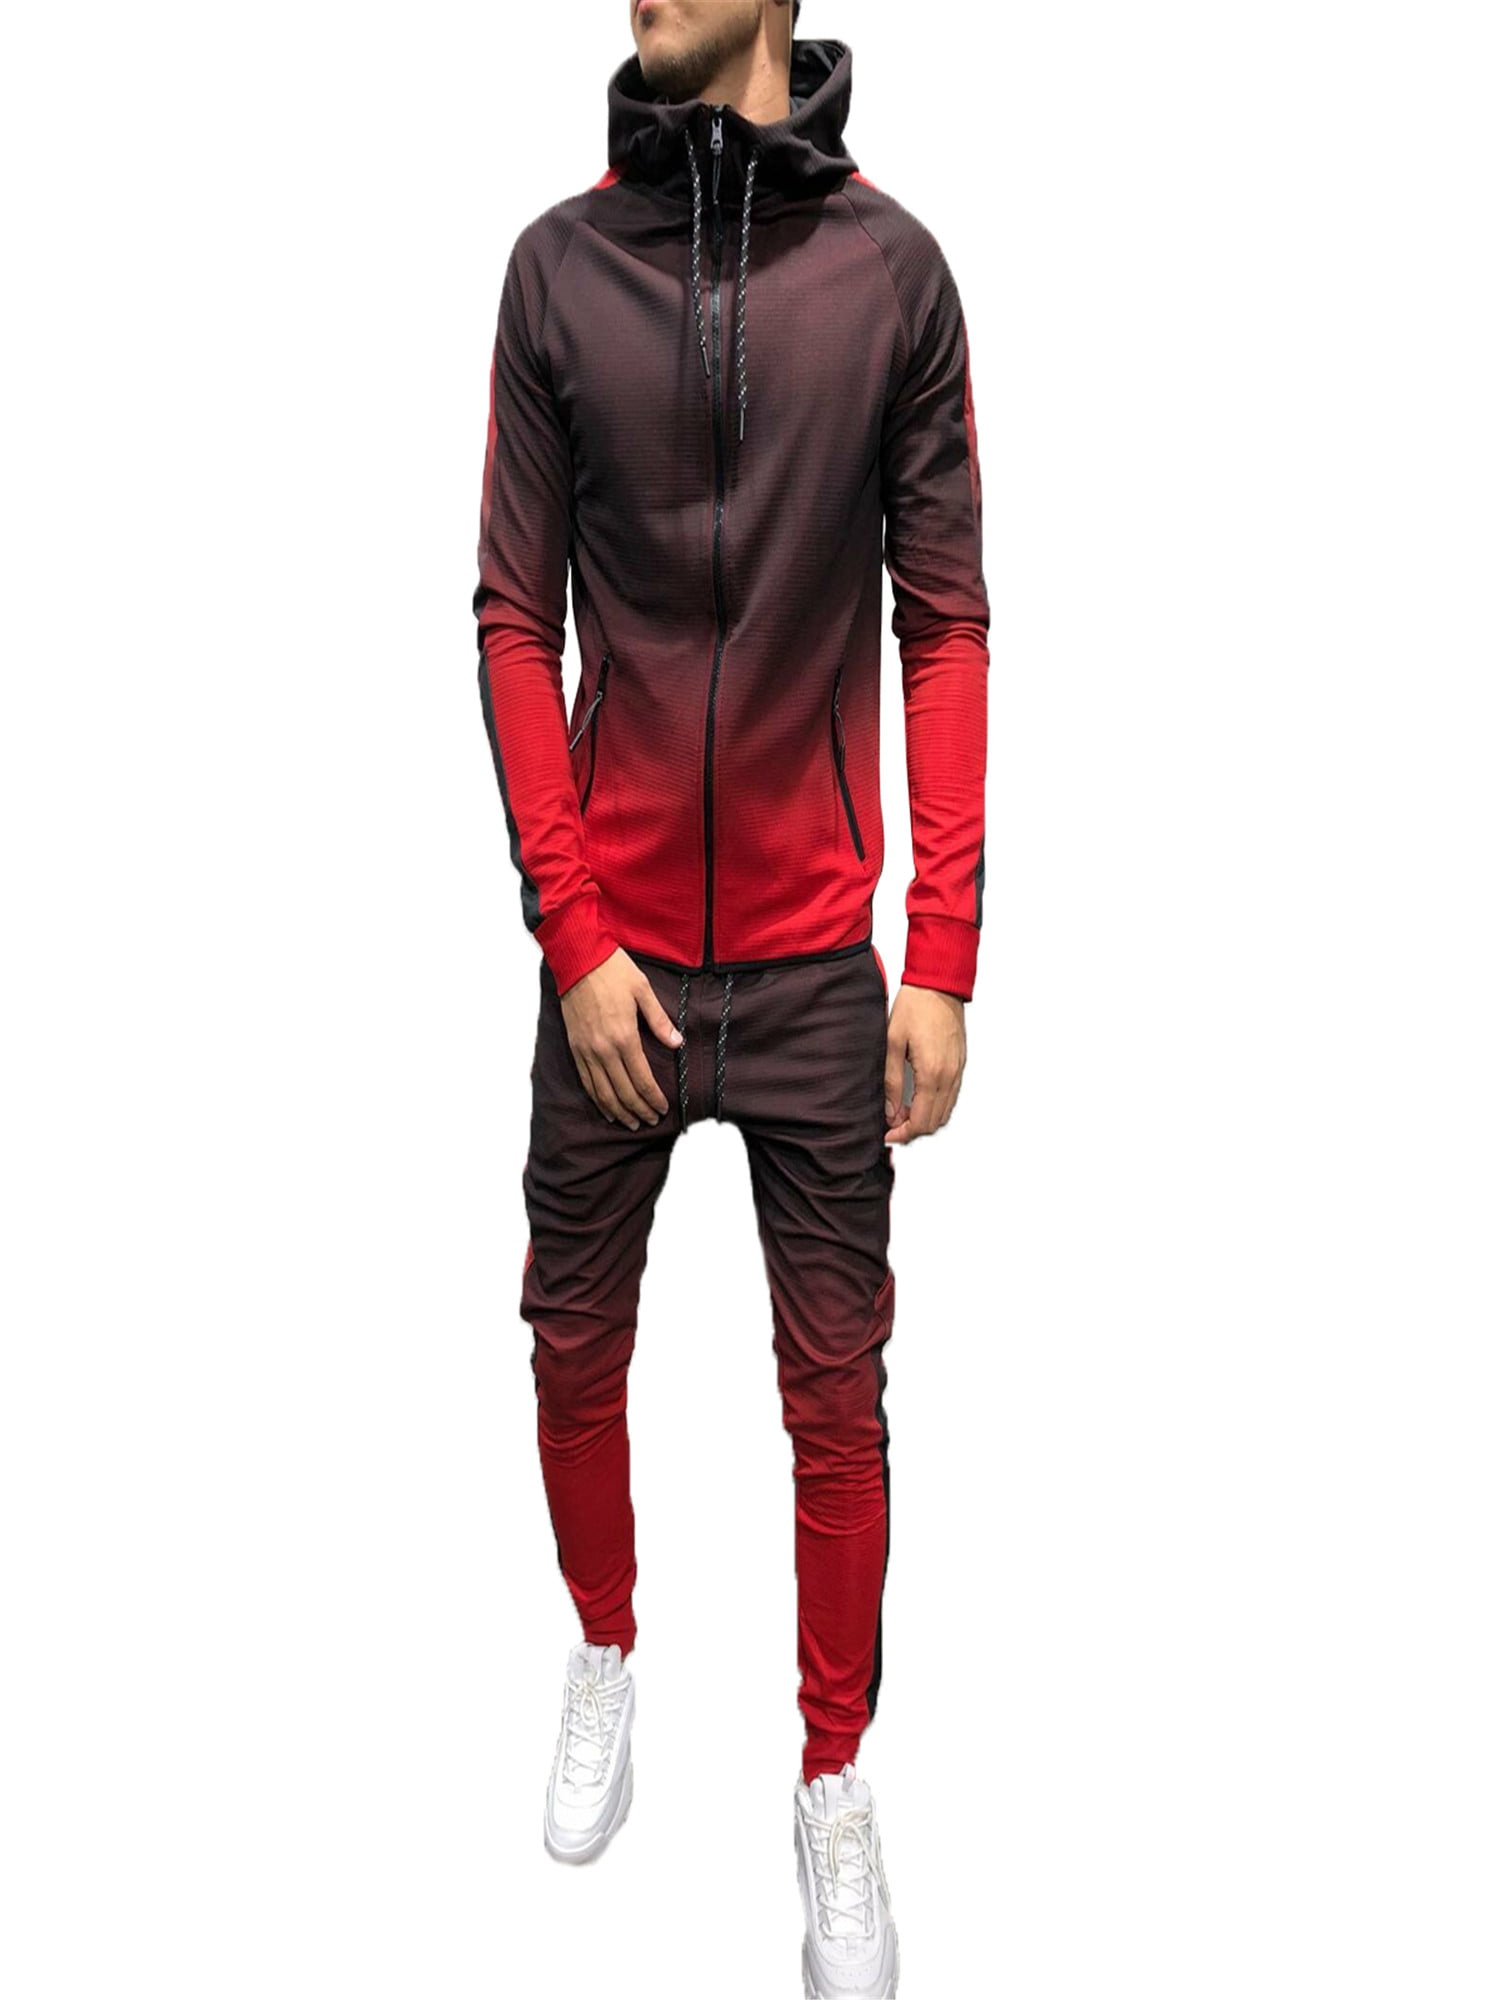 Details about   Mens Fleece Tracksuit ActiveWear Winter Hooded Top Jogging Bottom Gym Sports 